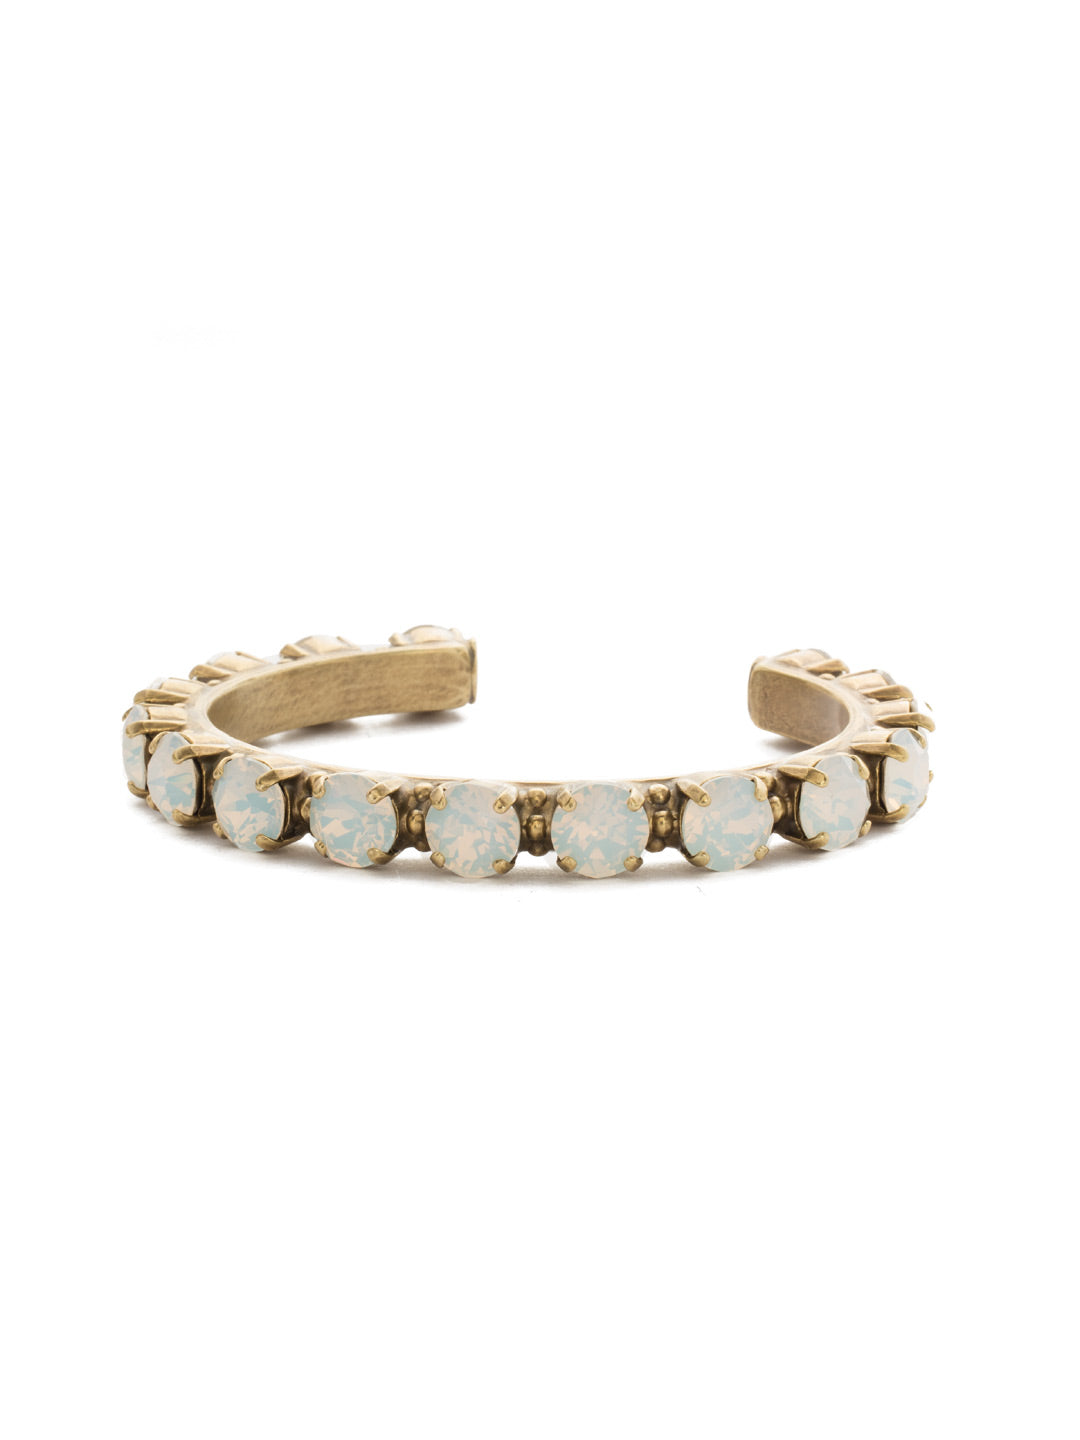 Riveting Romance Cuff Bracelet - BCL23AGWO - Truly antique-inspired, this piece can be mixed and matched in so many ways. Wear it with a vintage inspired outfit, or add a twist to a modern trend. This piece will match with everything! From Sorrelli's White Opal collection in our Antique Gold-tone finish.